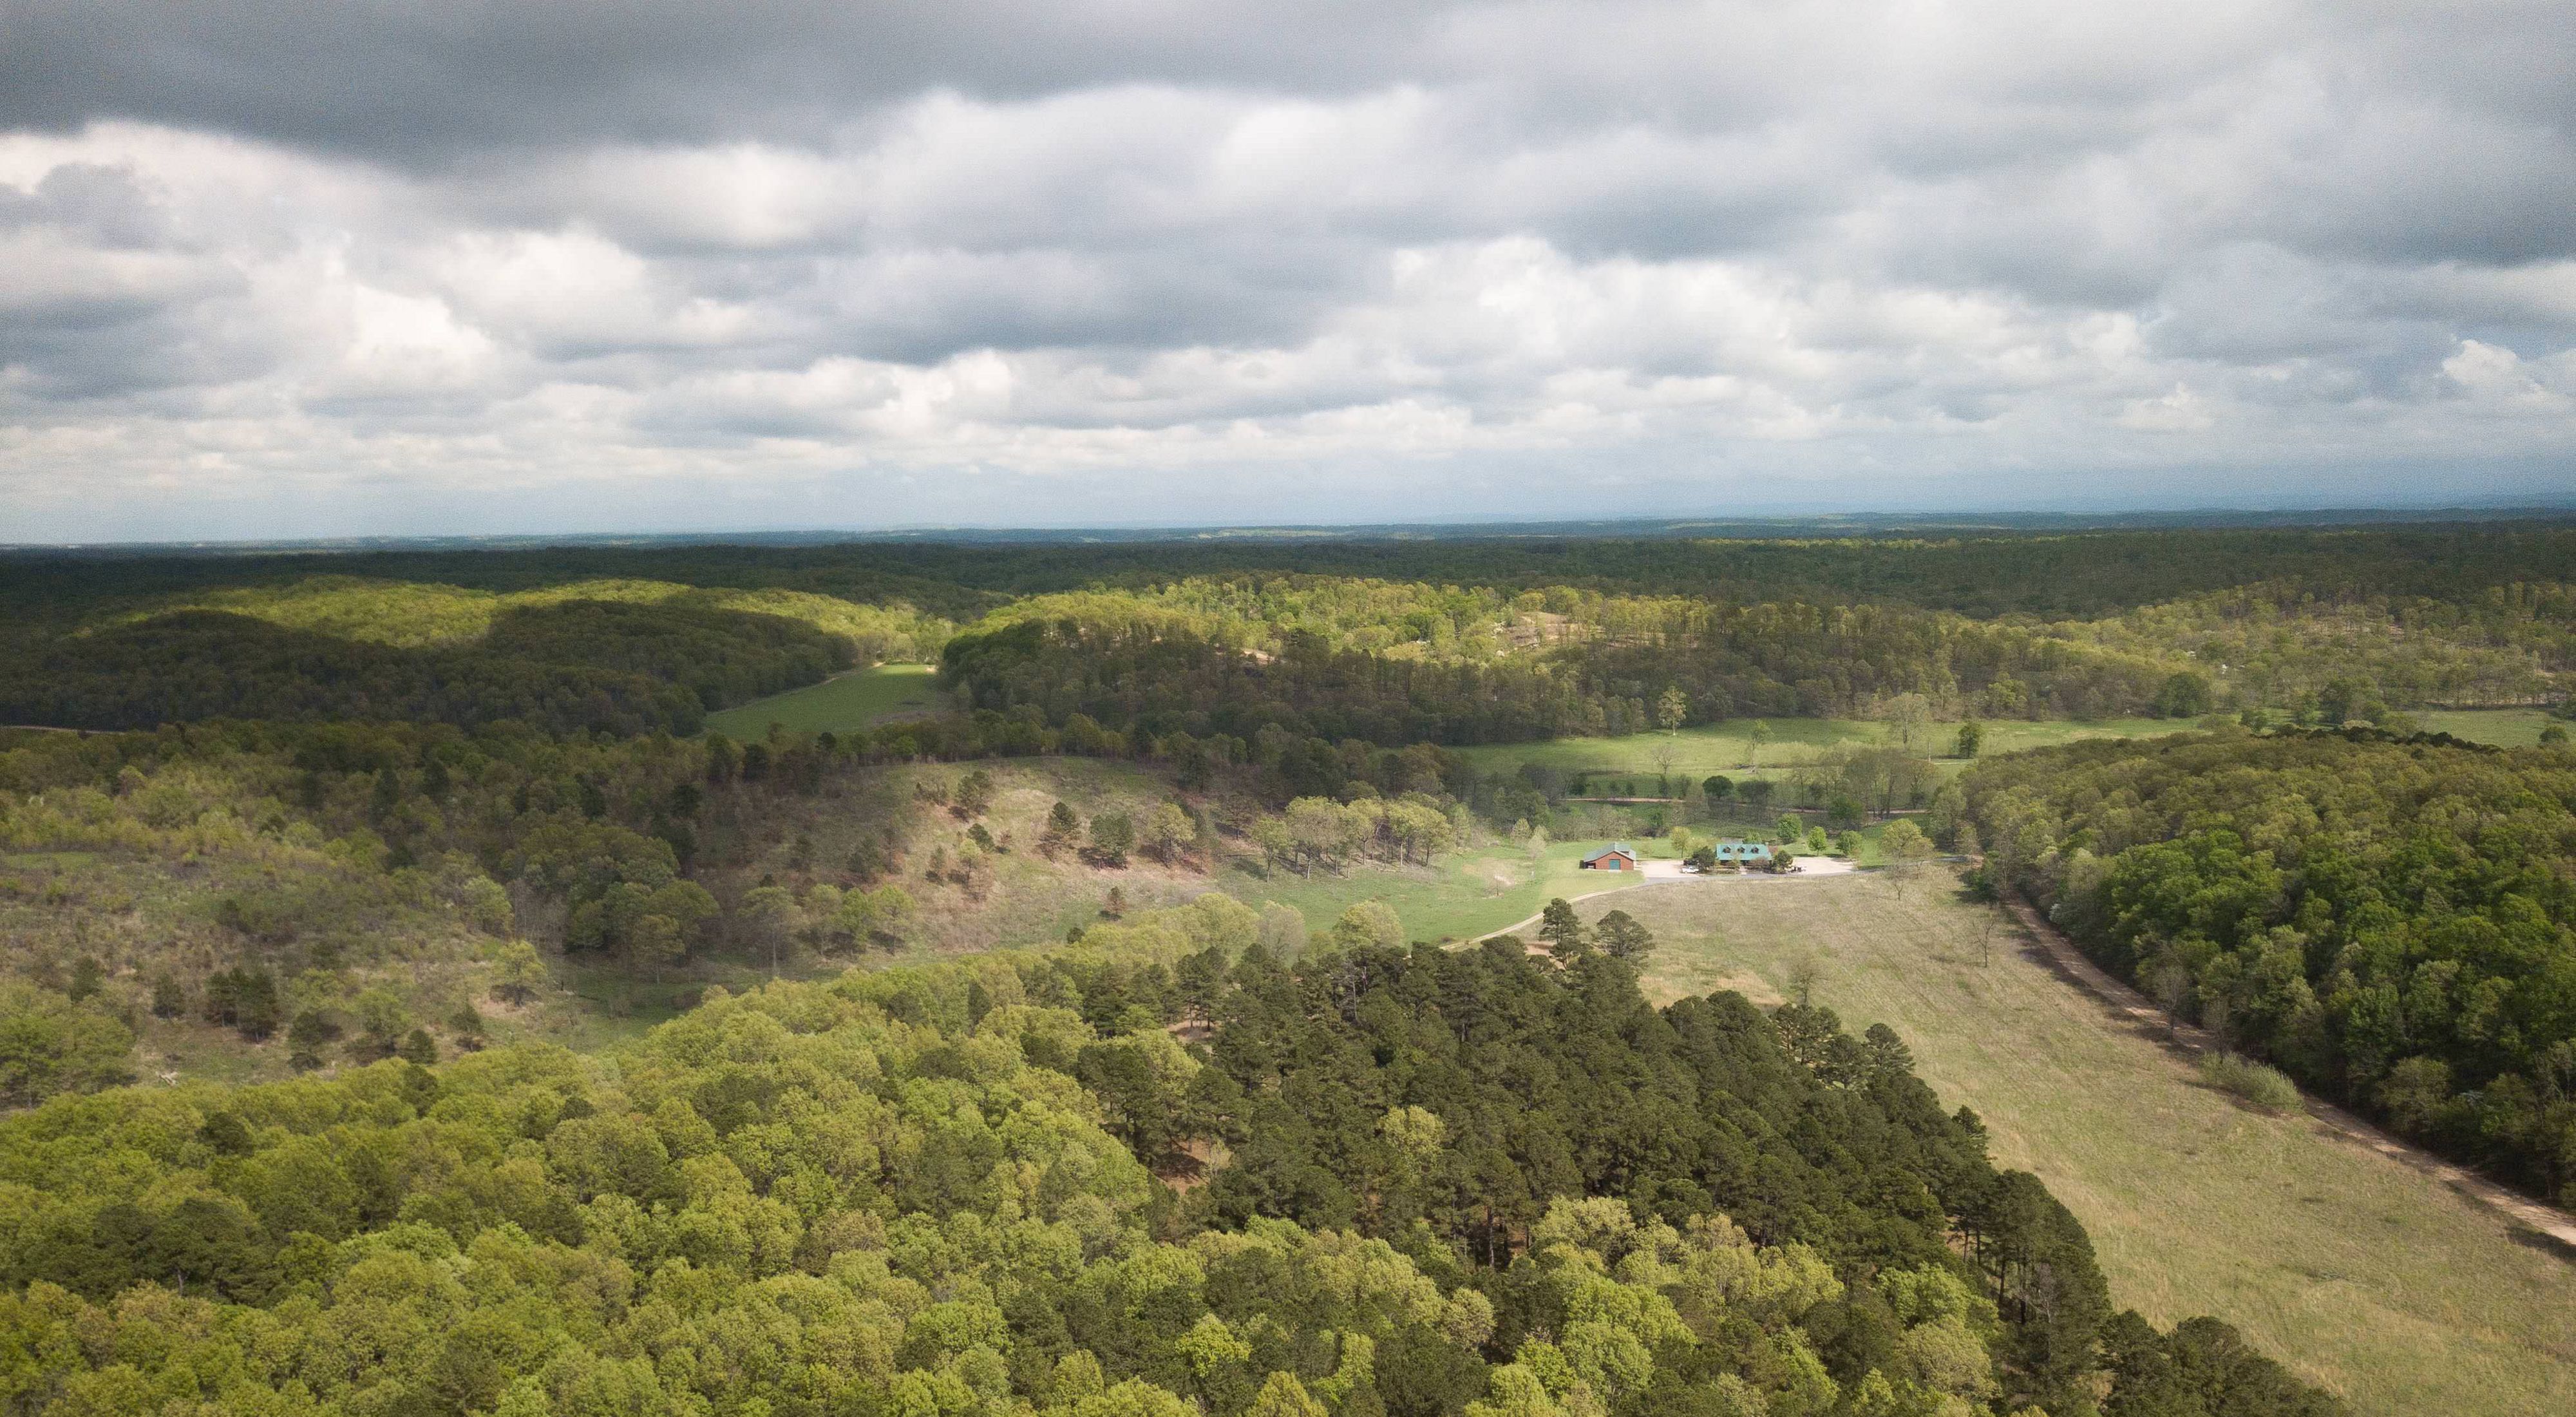 Birds-eye view of the J.T. Nickel Family Nature & Wildlife Preserve in the Ozark forest.